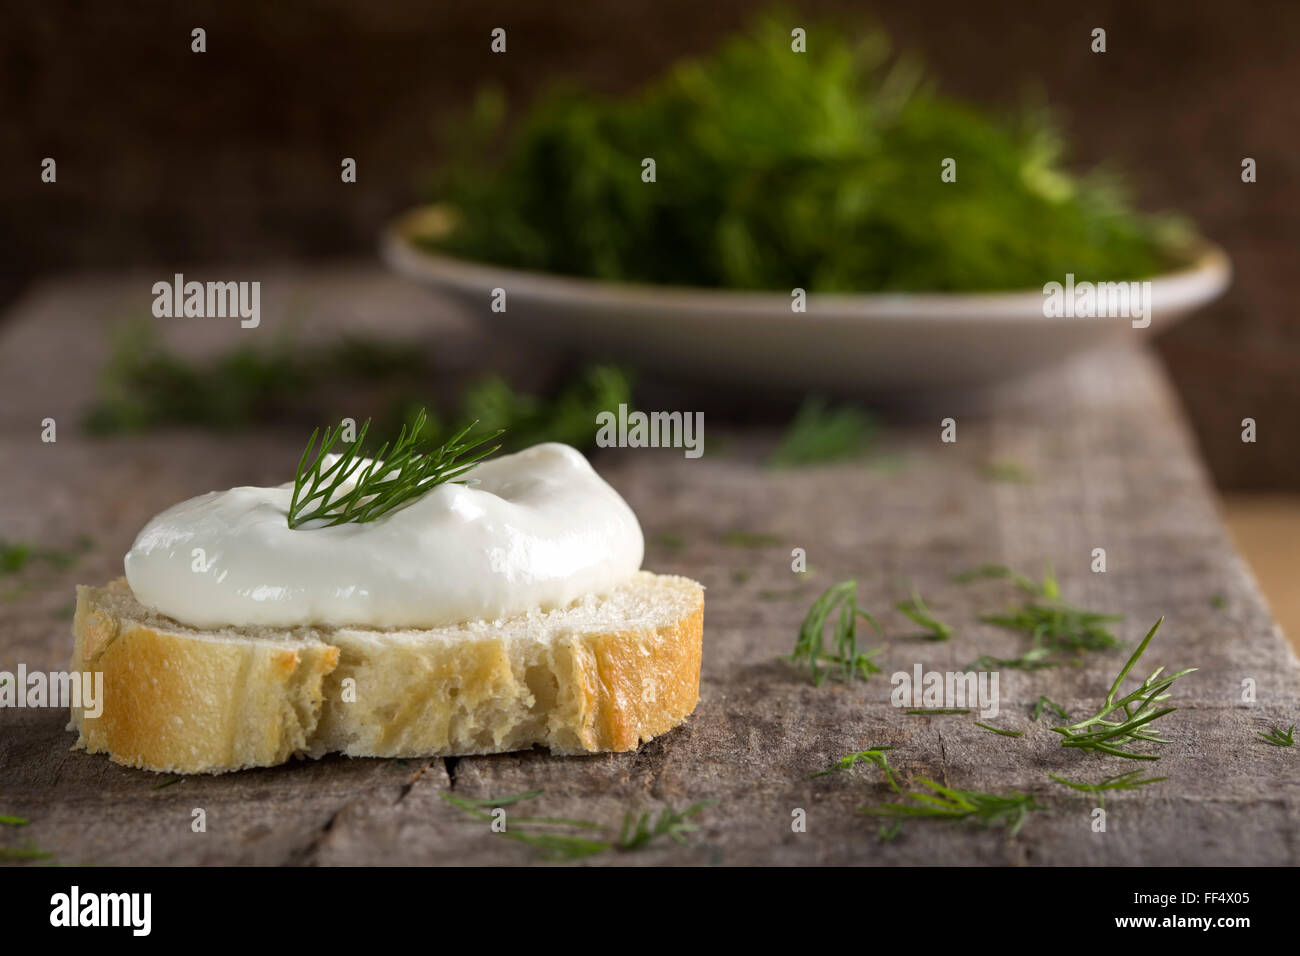 Healthy Organic Whole Grain Bagel with Cream Cheese over wooden background with dill Stock Photo